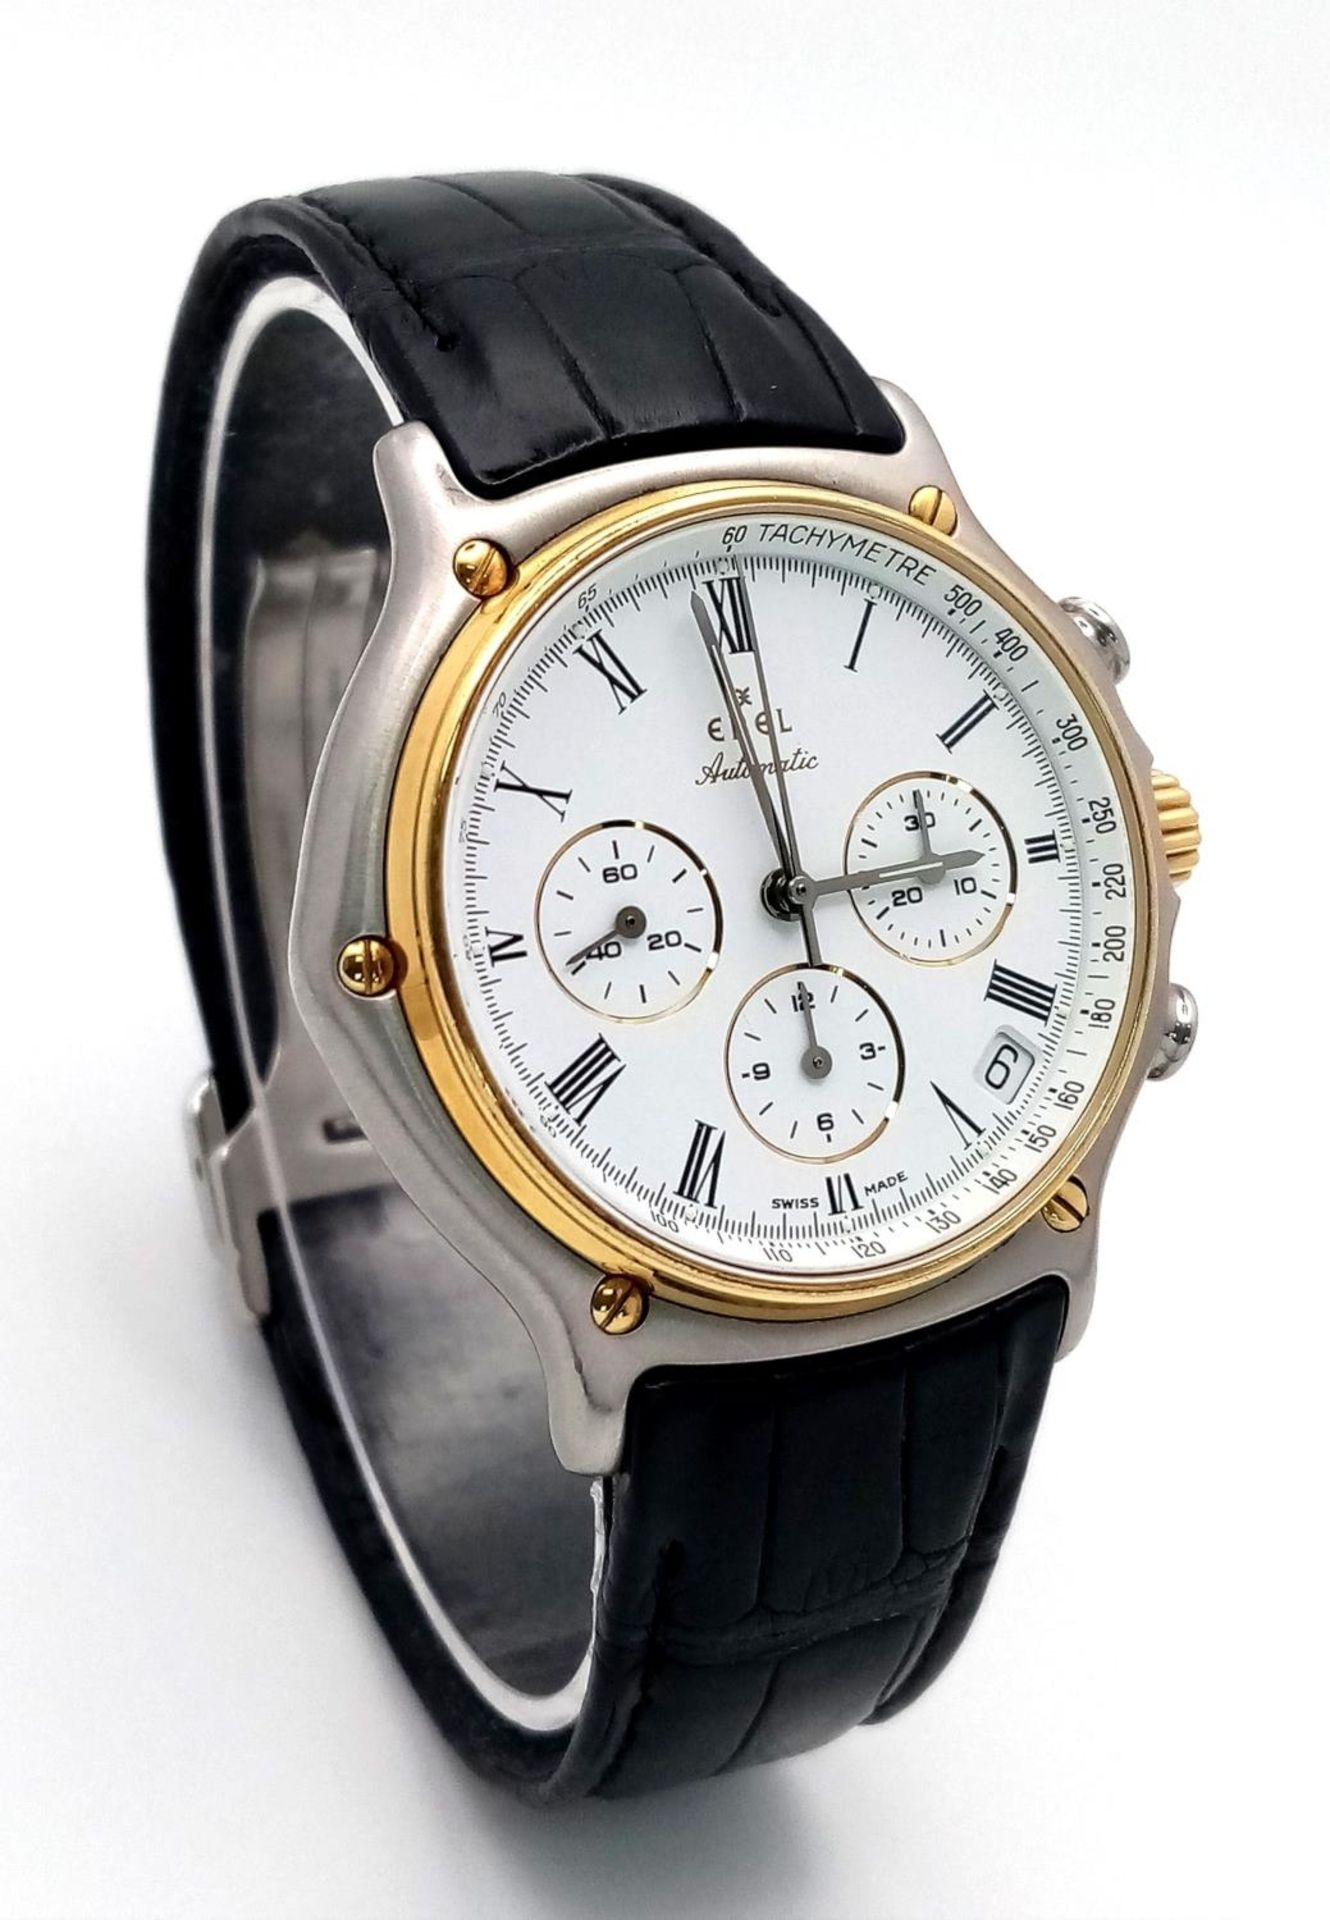 An Ebel Automatic Chronograph Gents Watch. Black leather strap. Two tone case - 38mm. White dial - Bild 4 aus 8